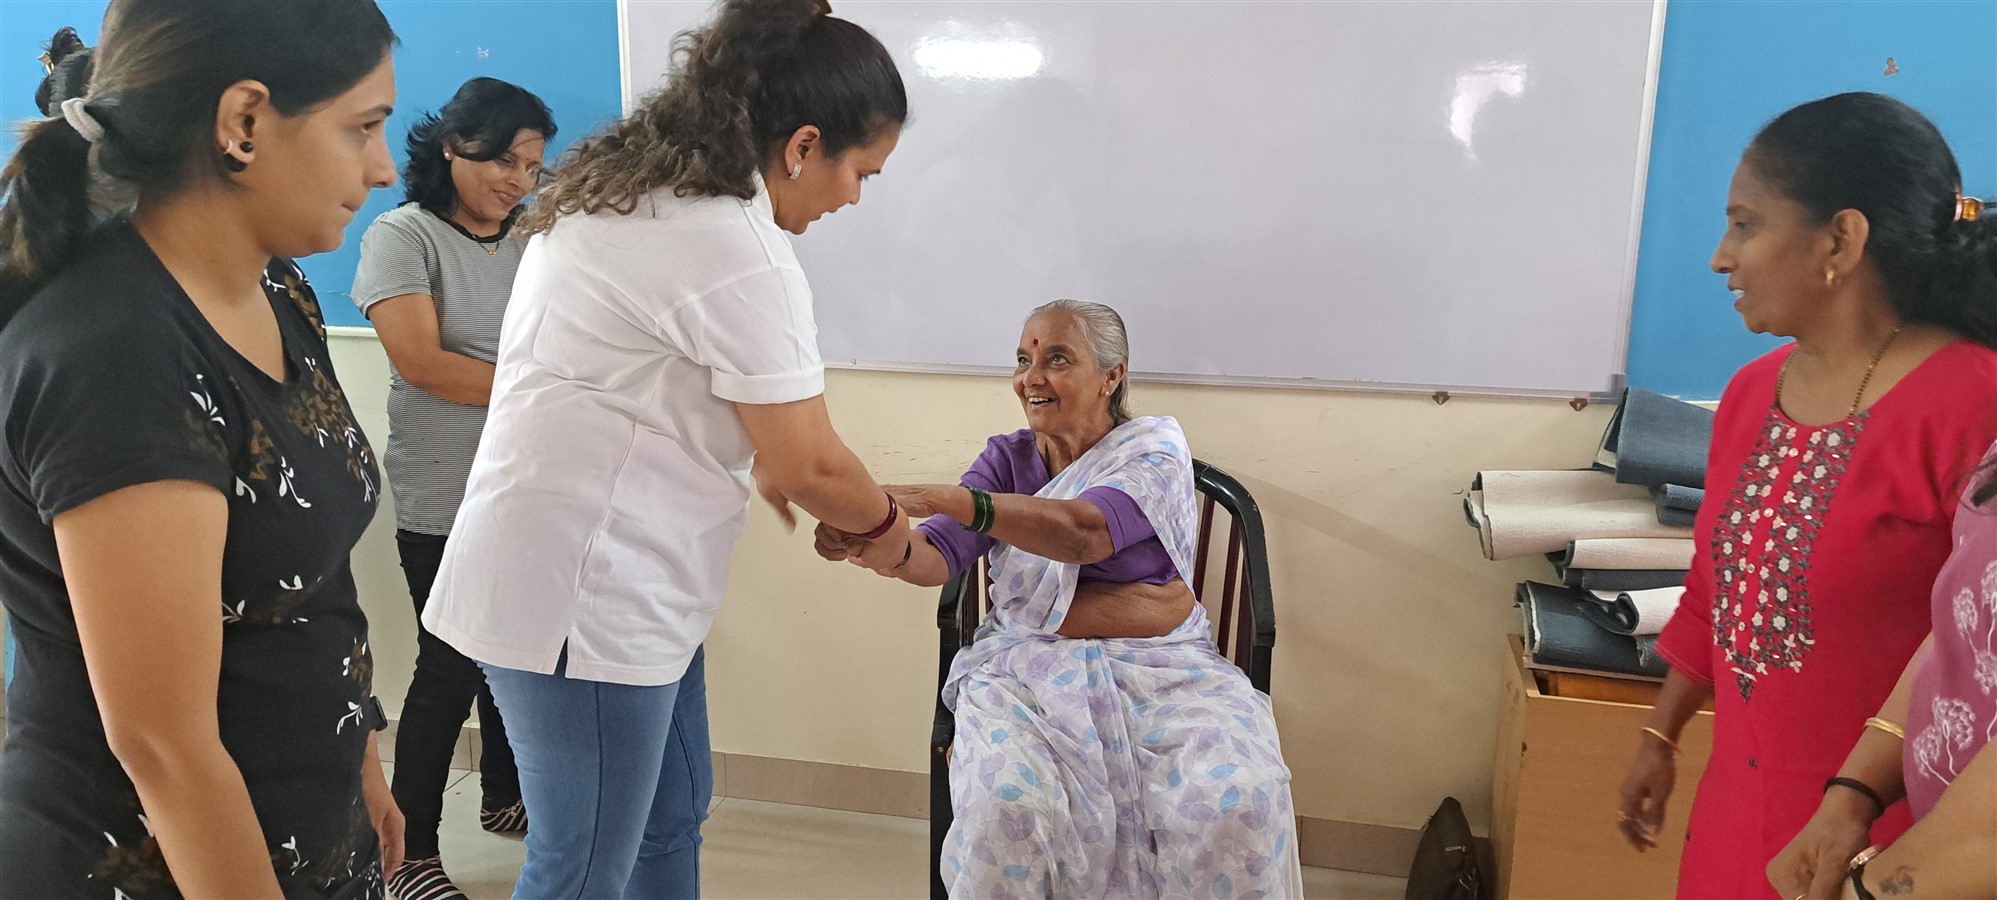 A senior citizen trying to release her wrist from a strong grip as a part of the self defence training